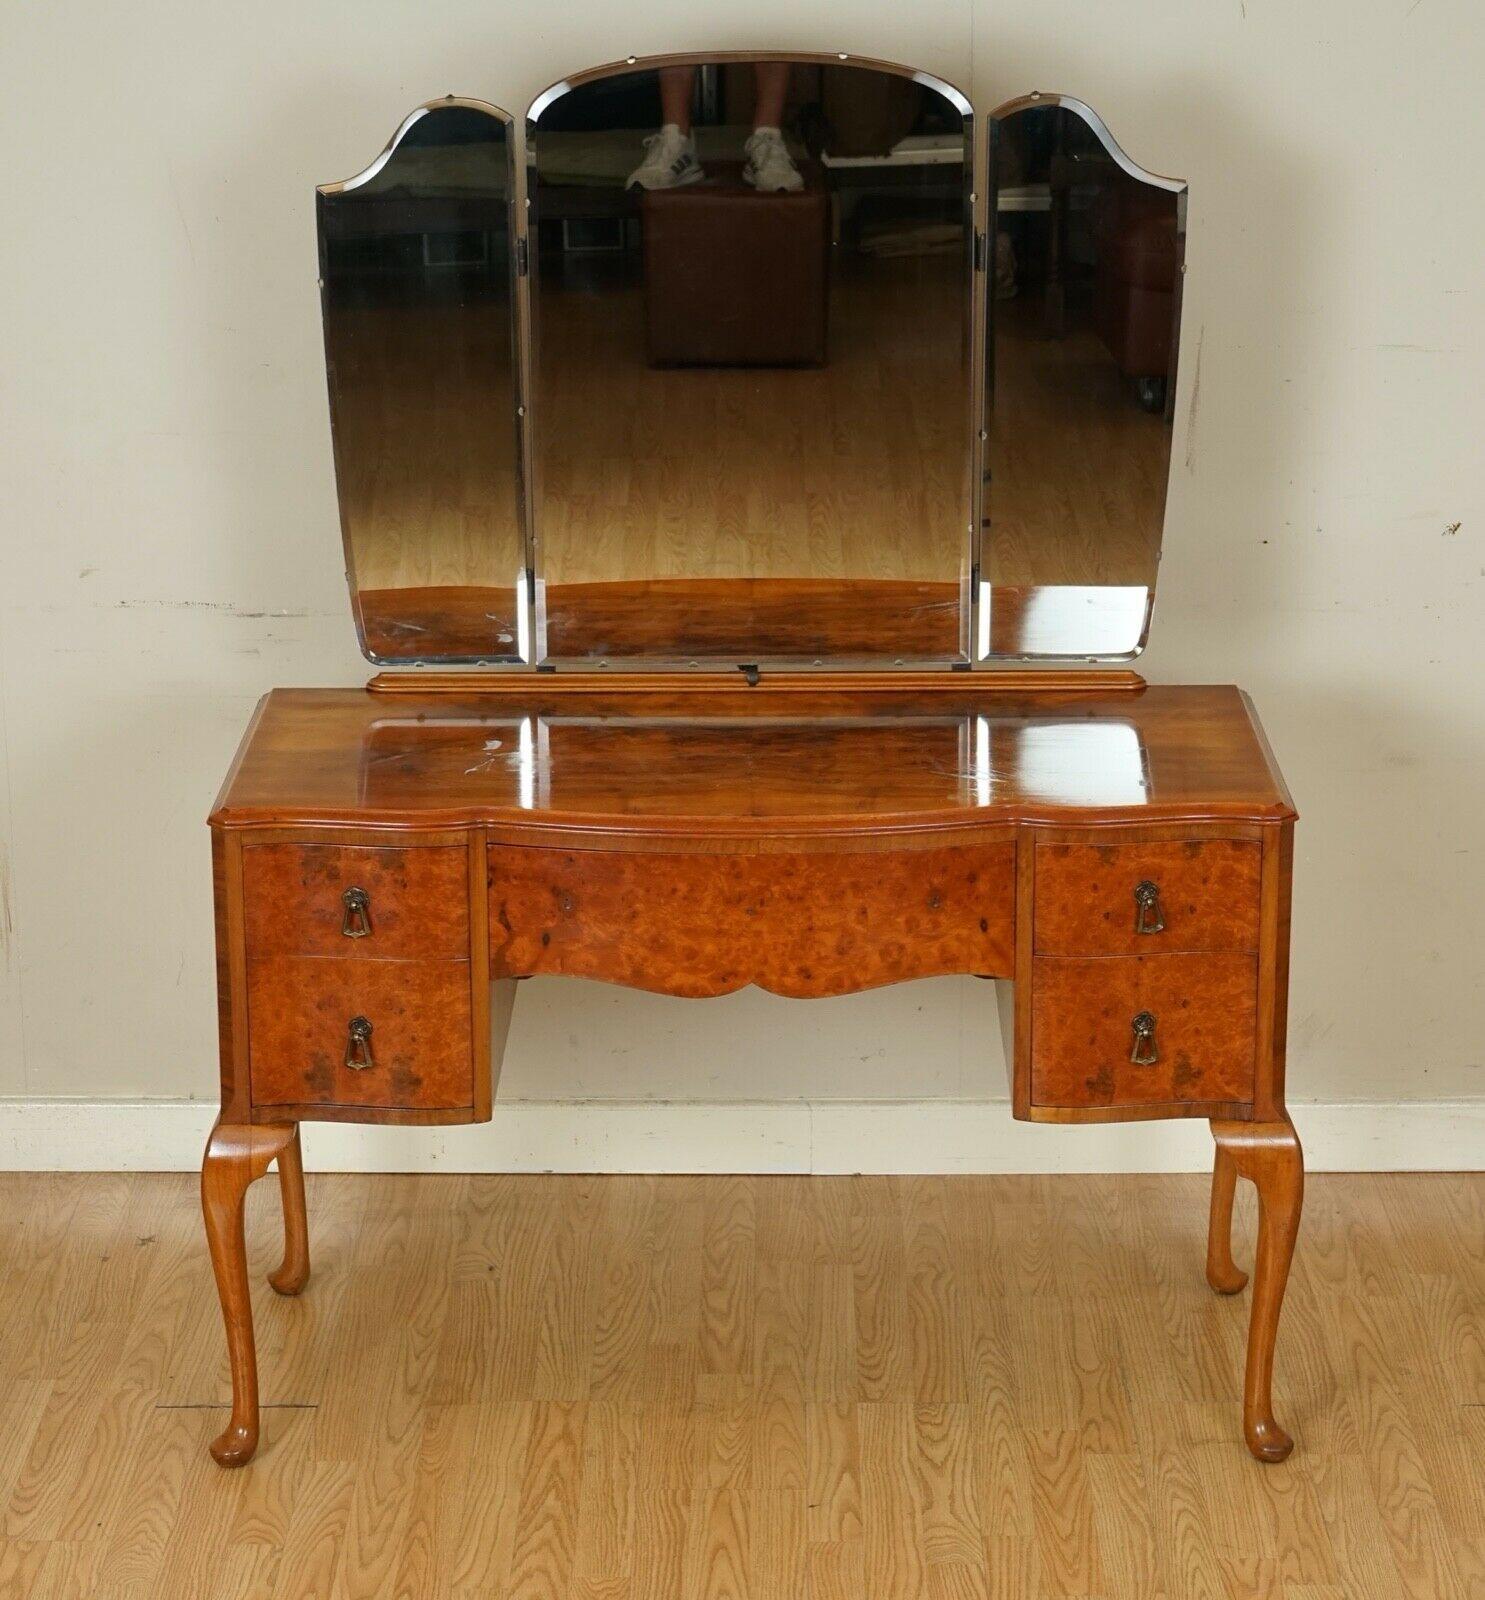 We are delighted to offer for sale this lovely vintage burr walnut dressing table.
A very lovely table with 5 drawers to store your belongings, triple mirrors which can be adjusted to your liking.
The top of the table has some wear as you will be